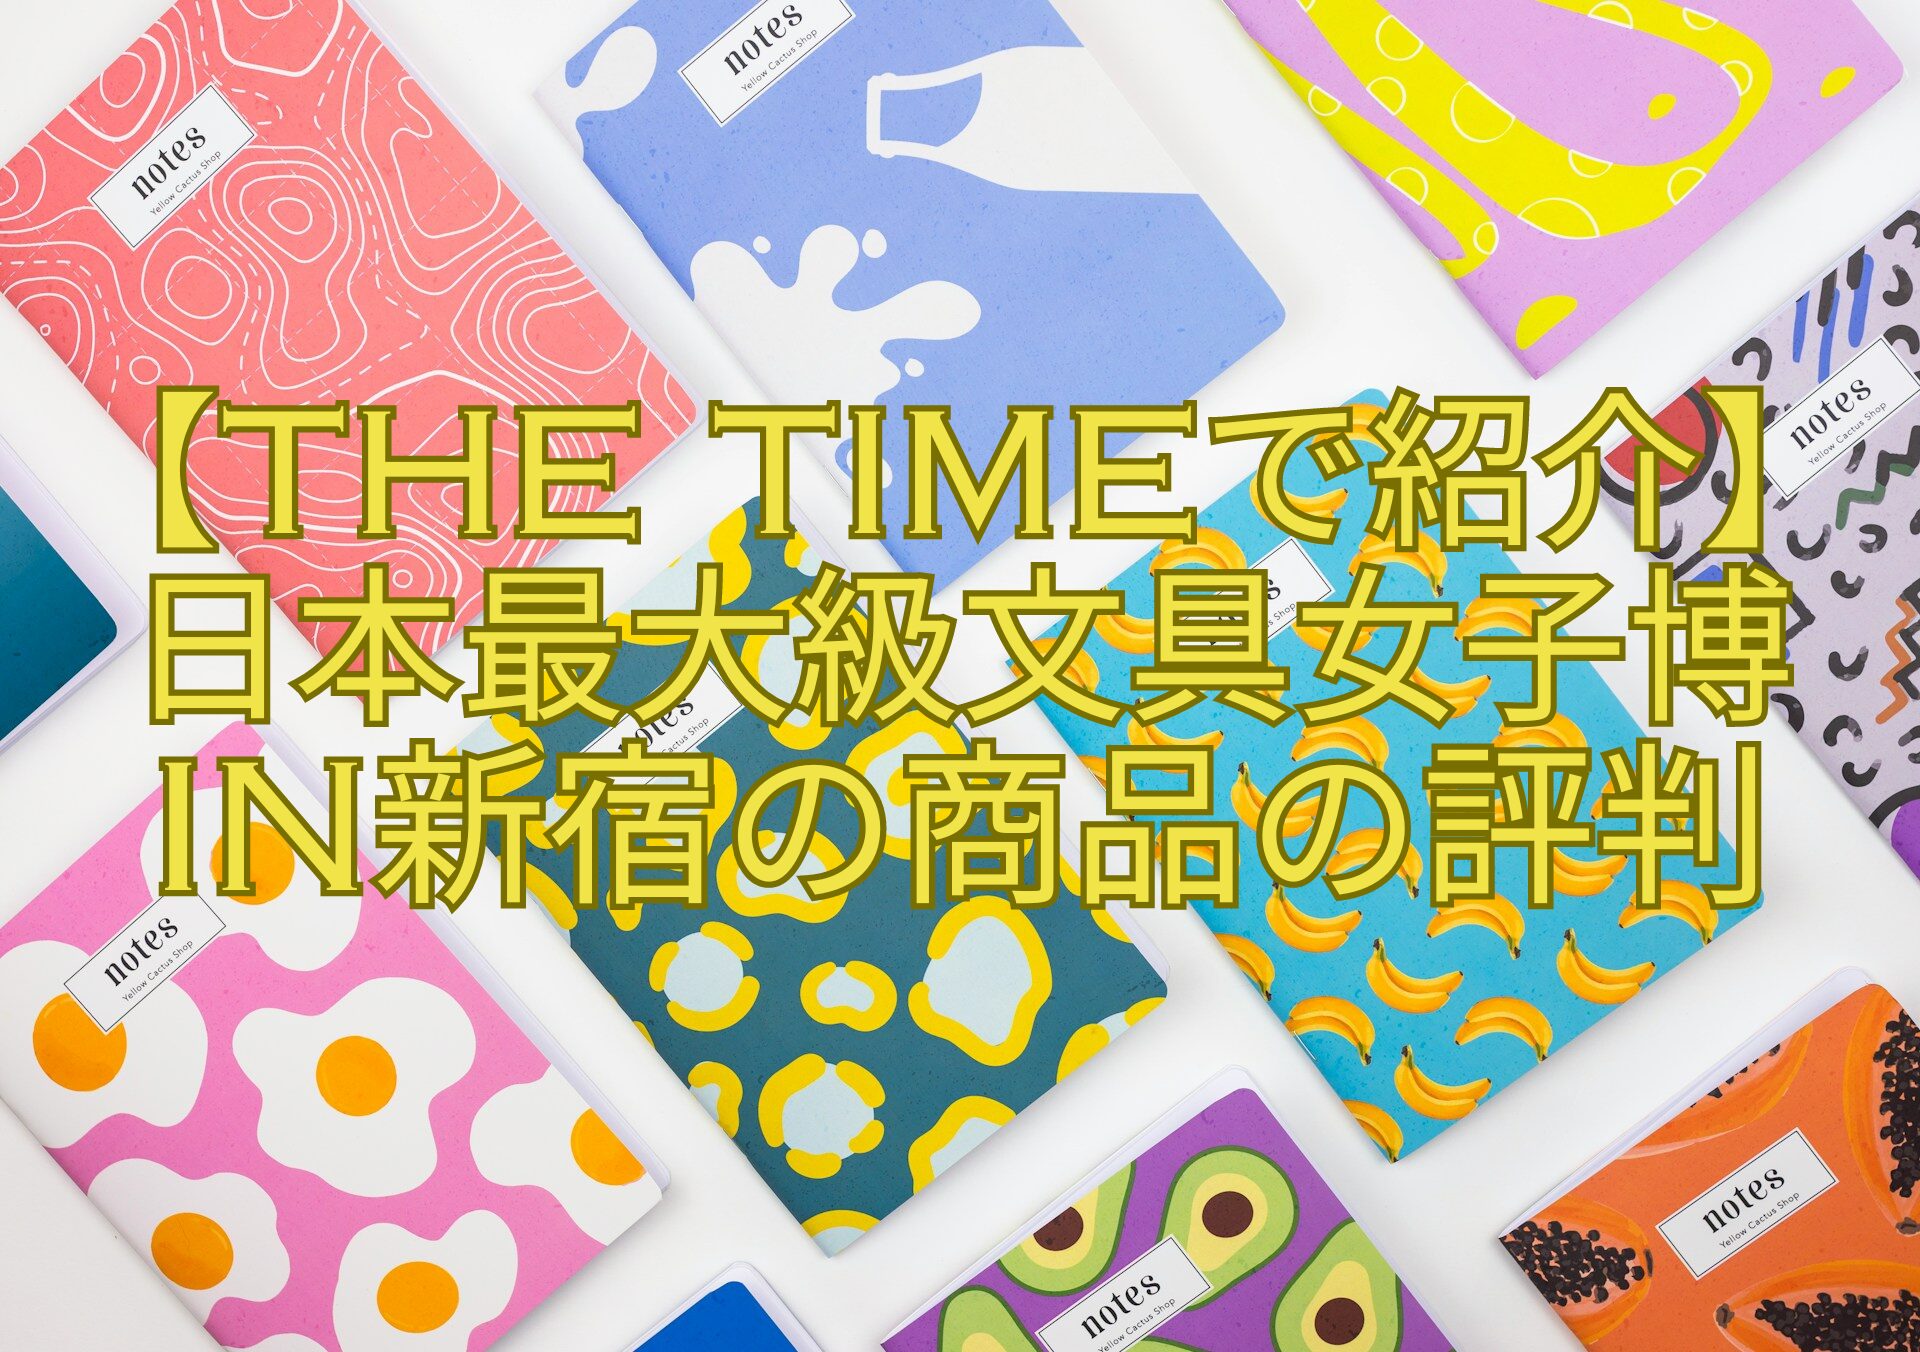 【THE-TIMEで紹介】日本最大級文具女子博-in新宿の商品の評判